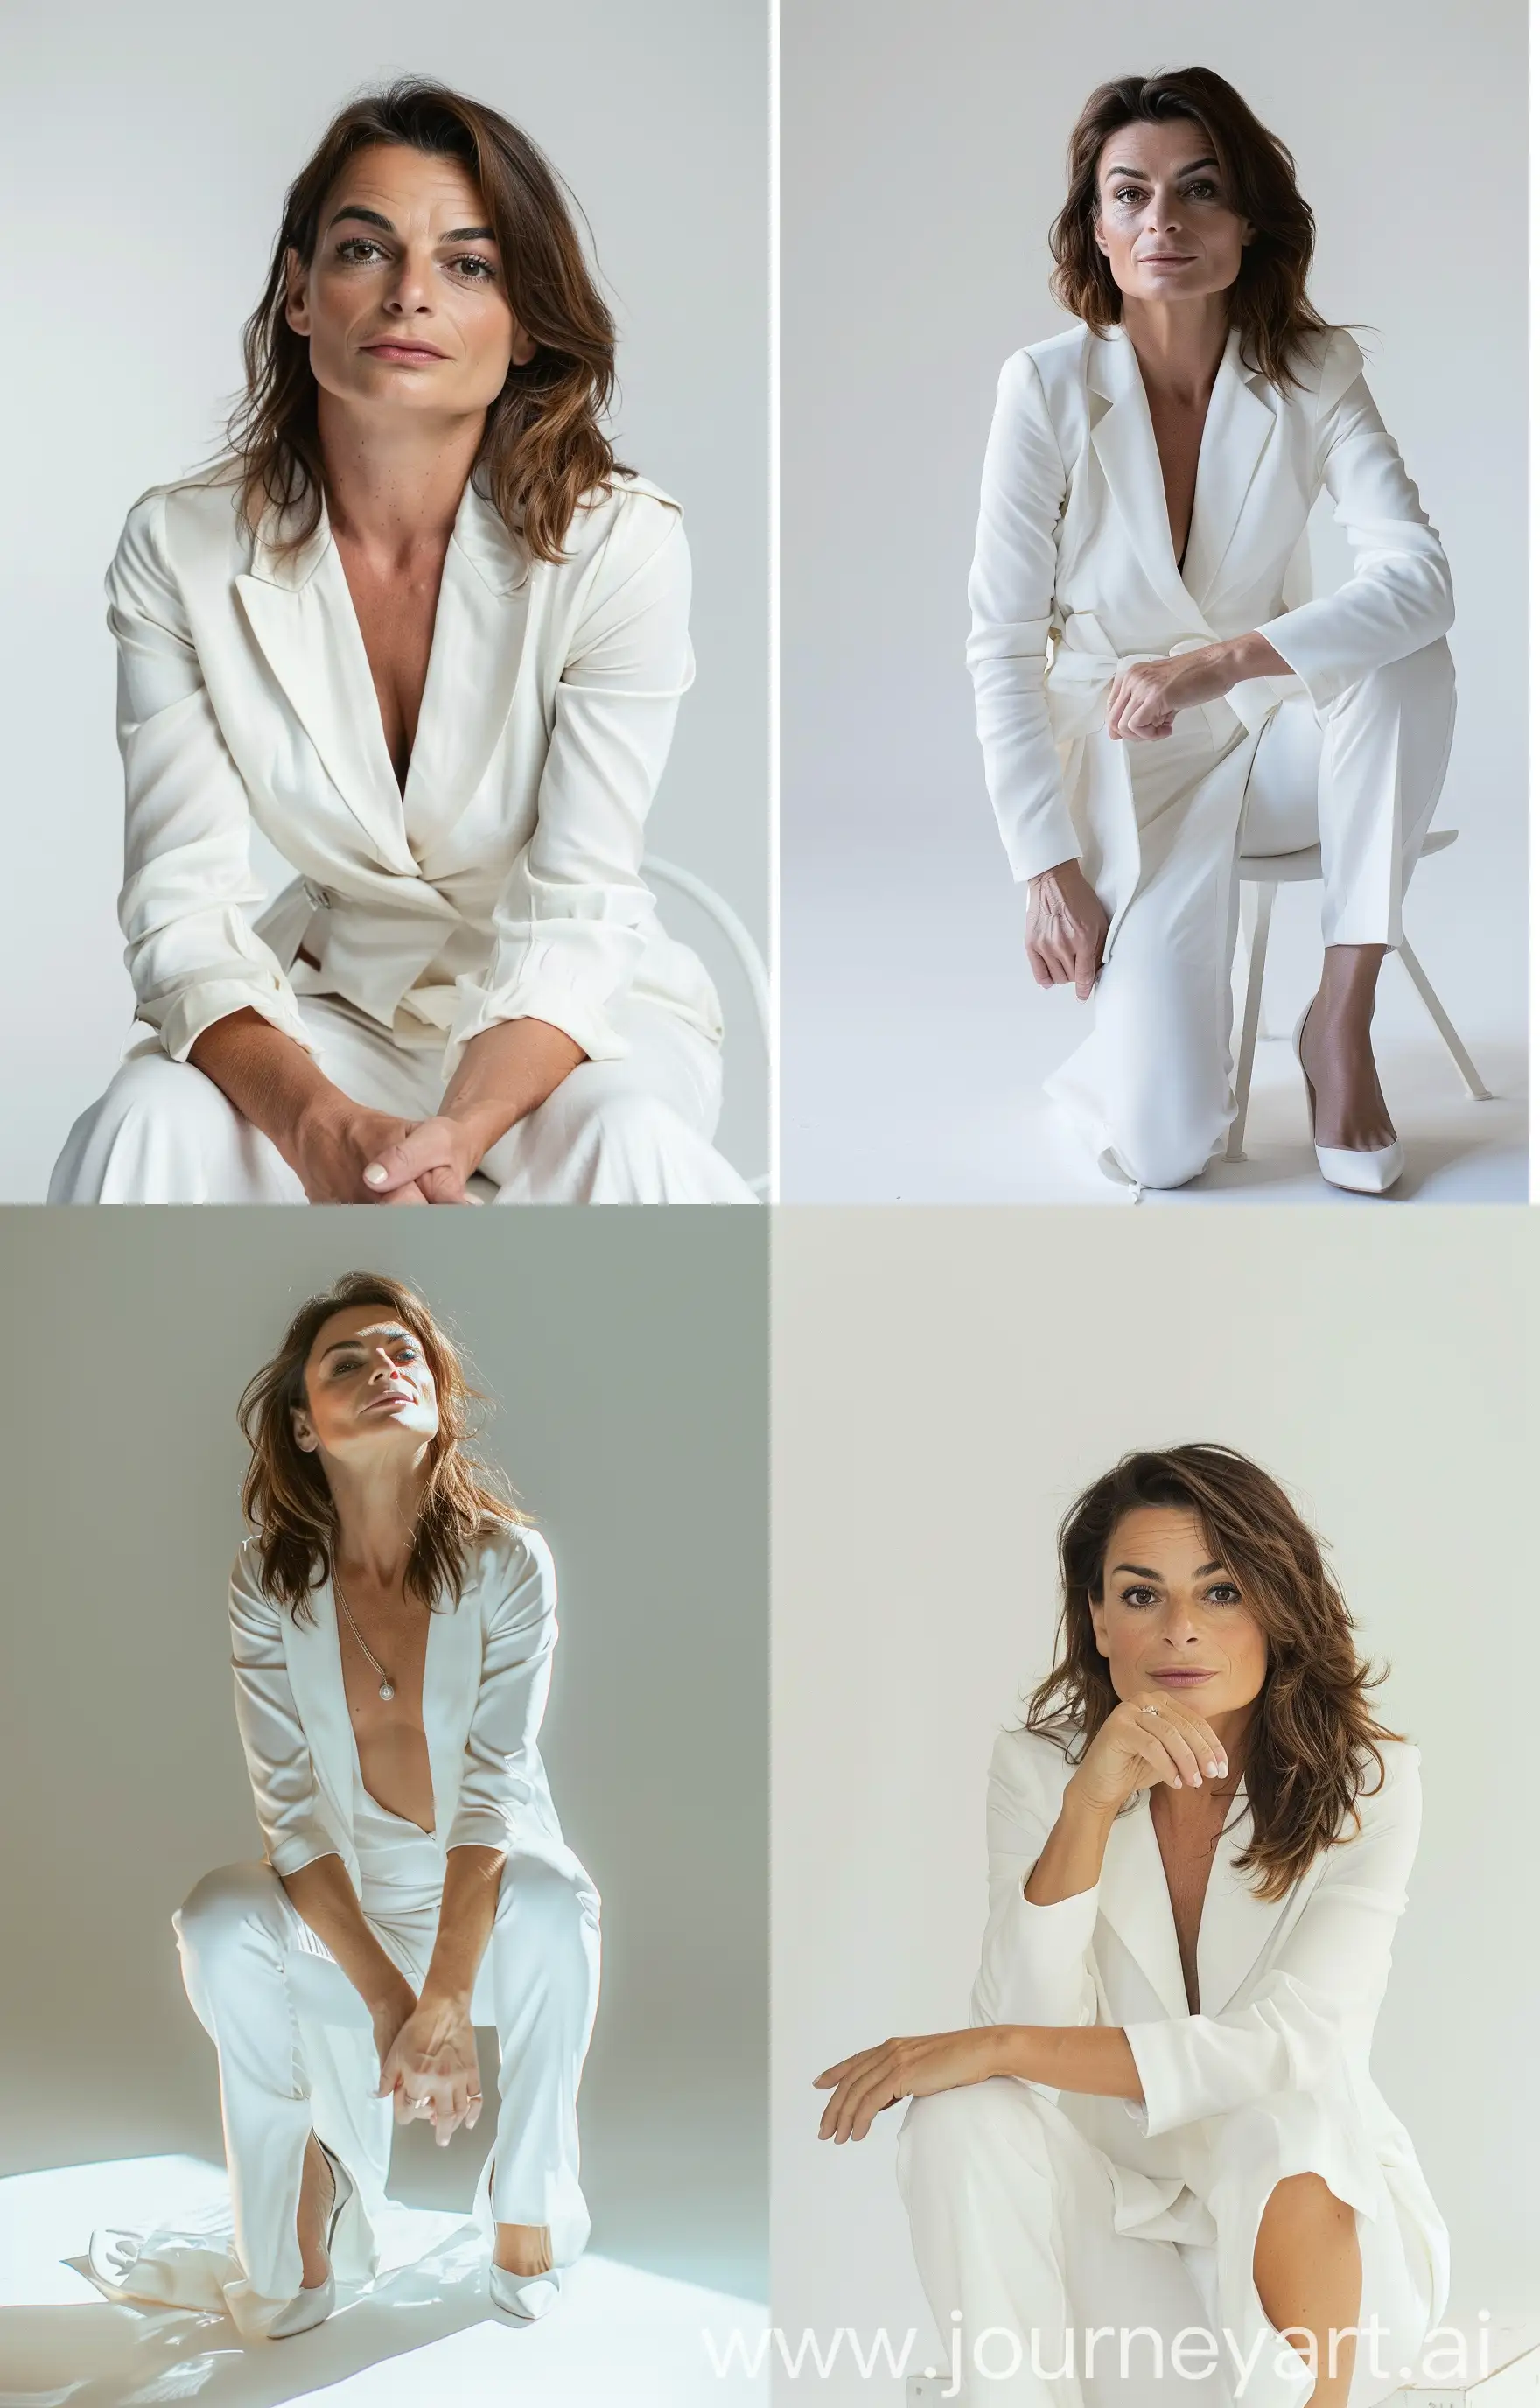 Elegant-Woman-in-White-Clothing-Studio-Portrait-with-Boss-Poses